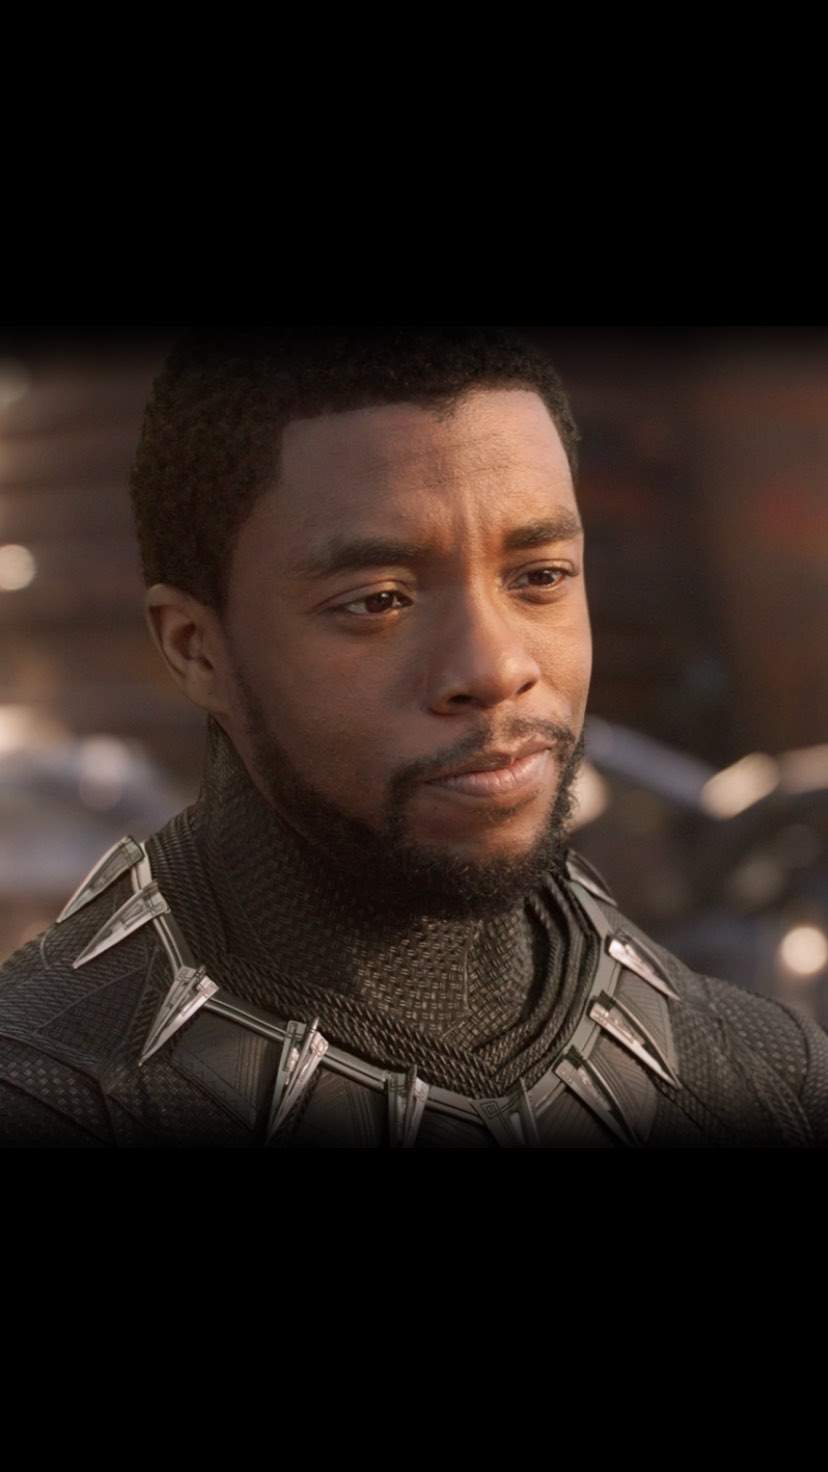 "You'll Always Be Our King" - Watch Marvel Studios' Special Tribute to Chadwick Boseman